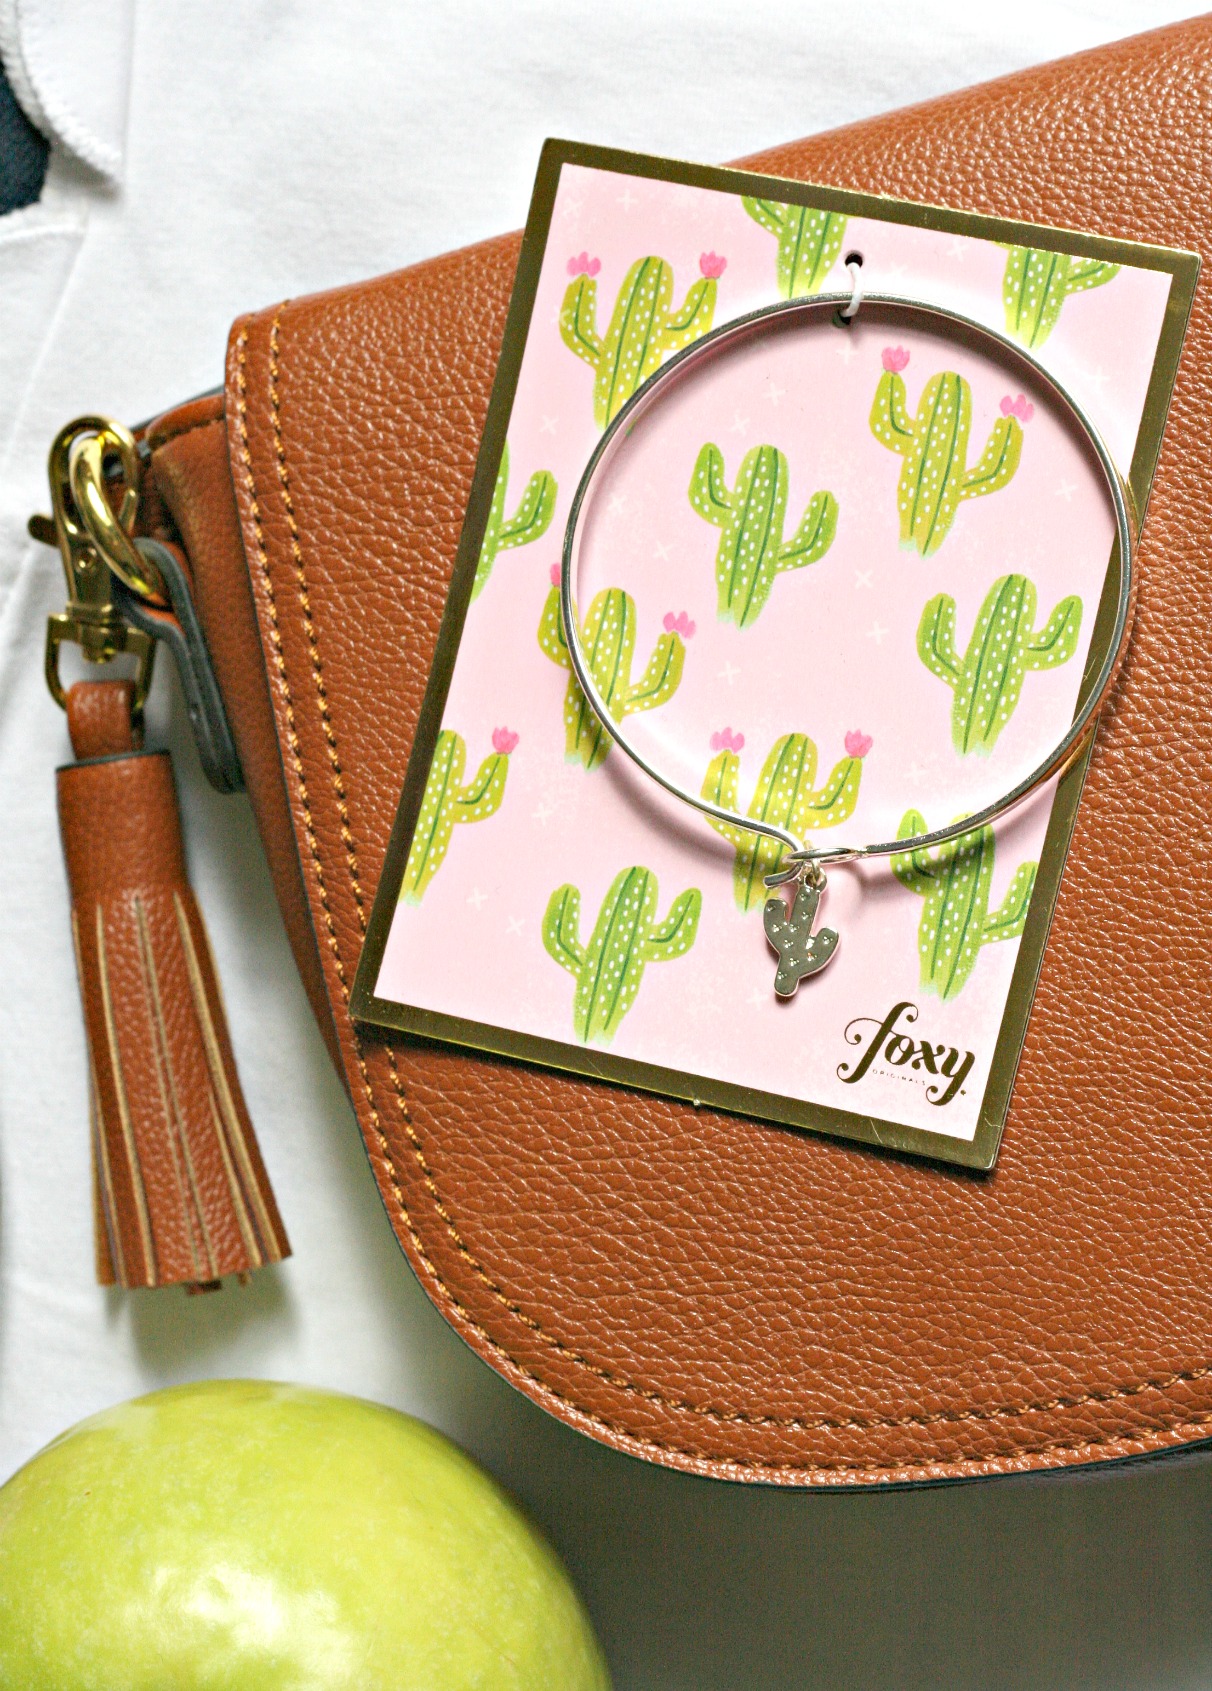 Foxy Originals cactus bangle try small things